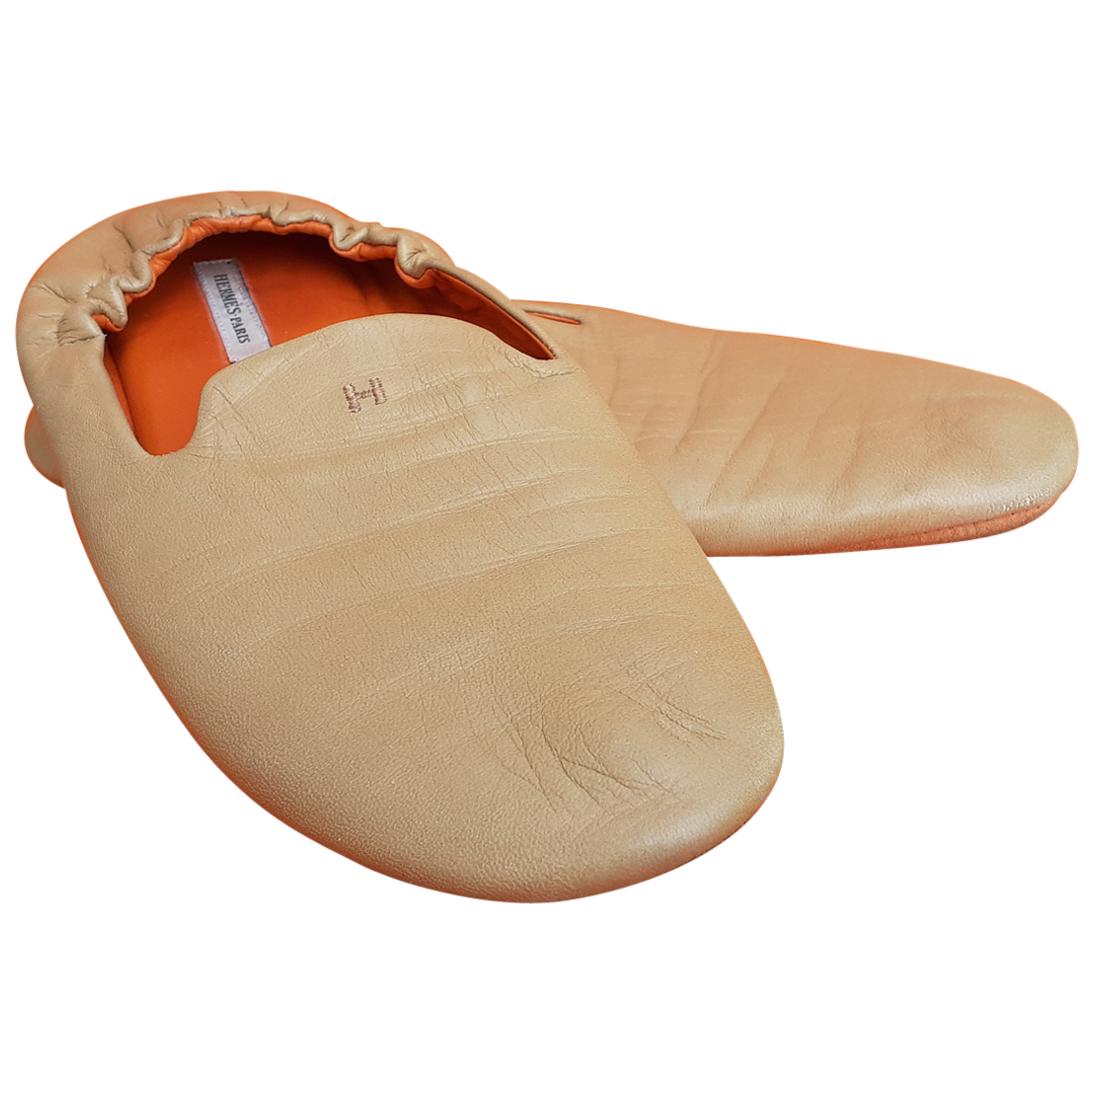 Hermès Leather Shoes Slippers Size 37 FR 